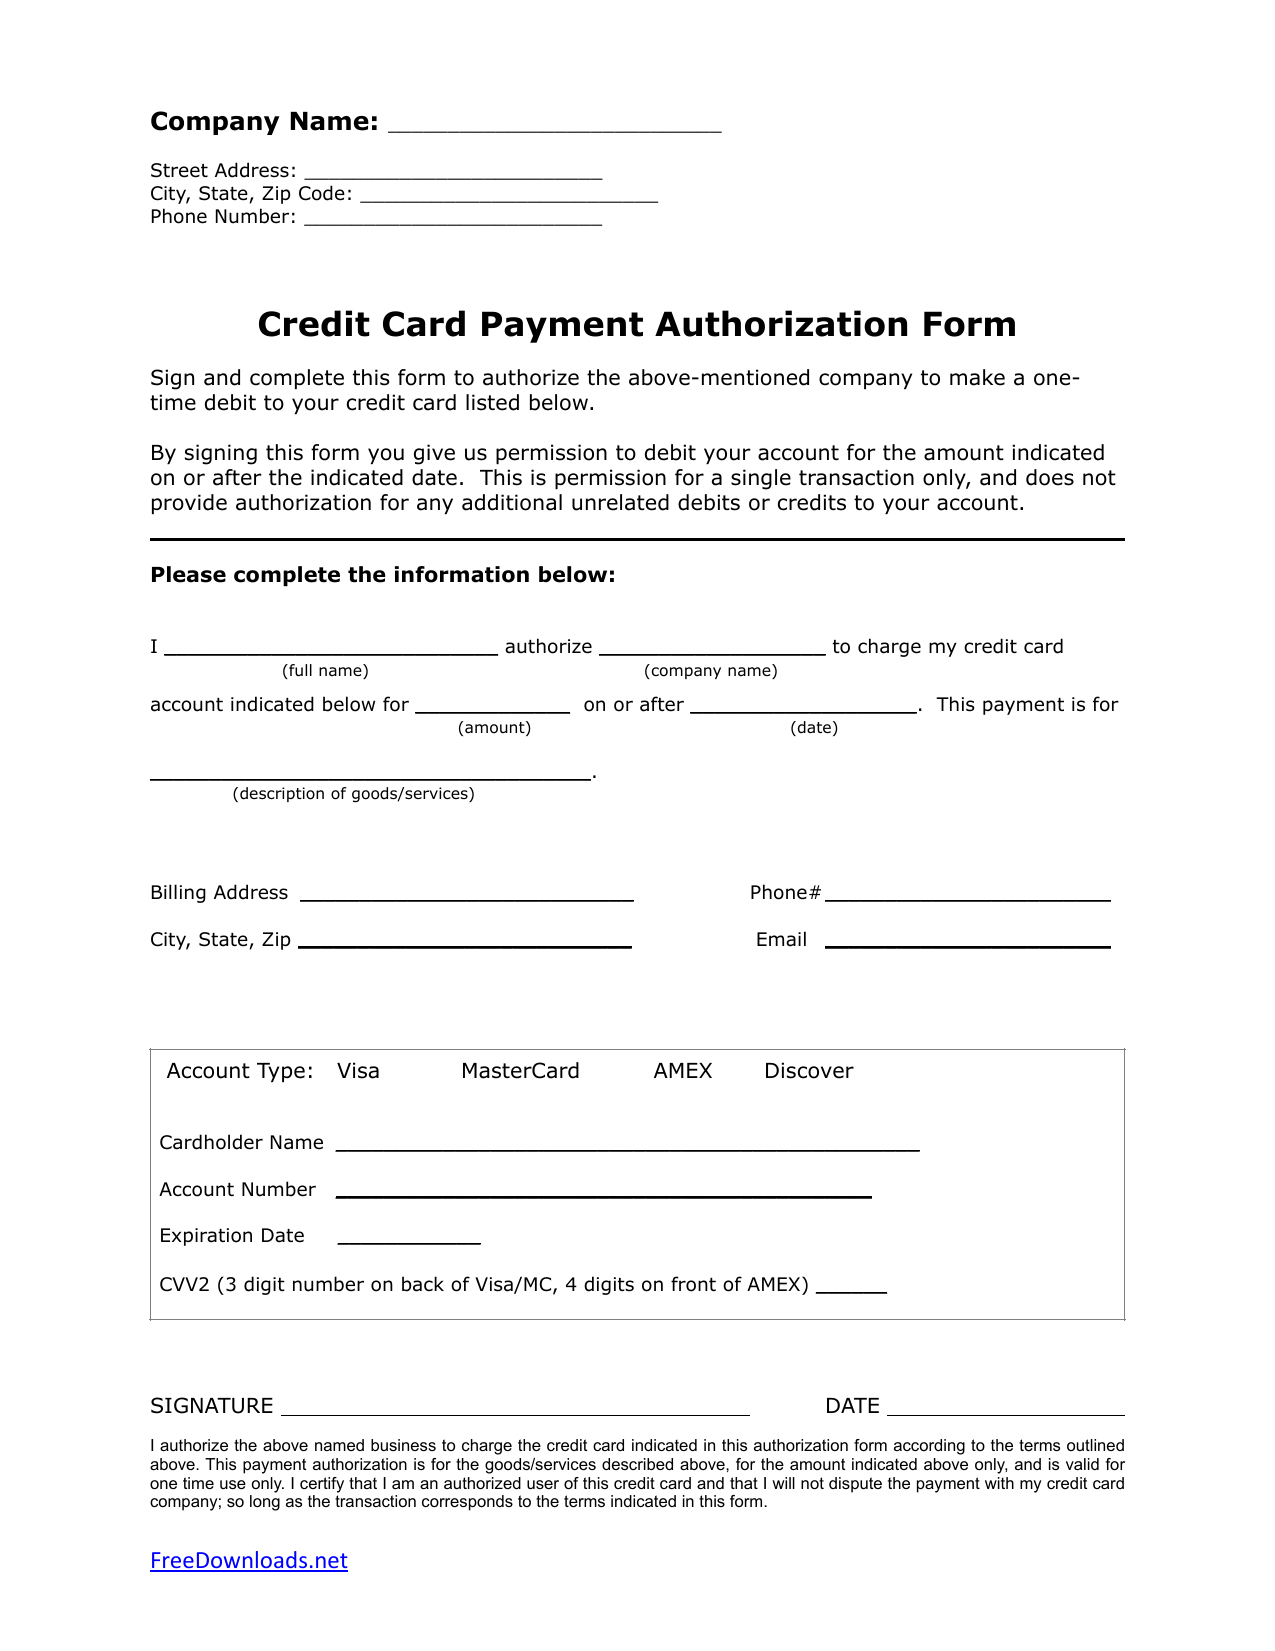 Download One (1) Time Credit Card Authorization Payment Form For Credit Card Payment Form Template Pdf